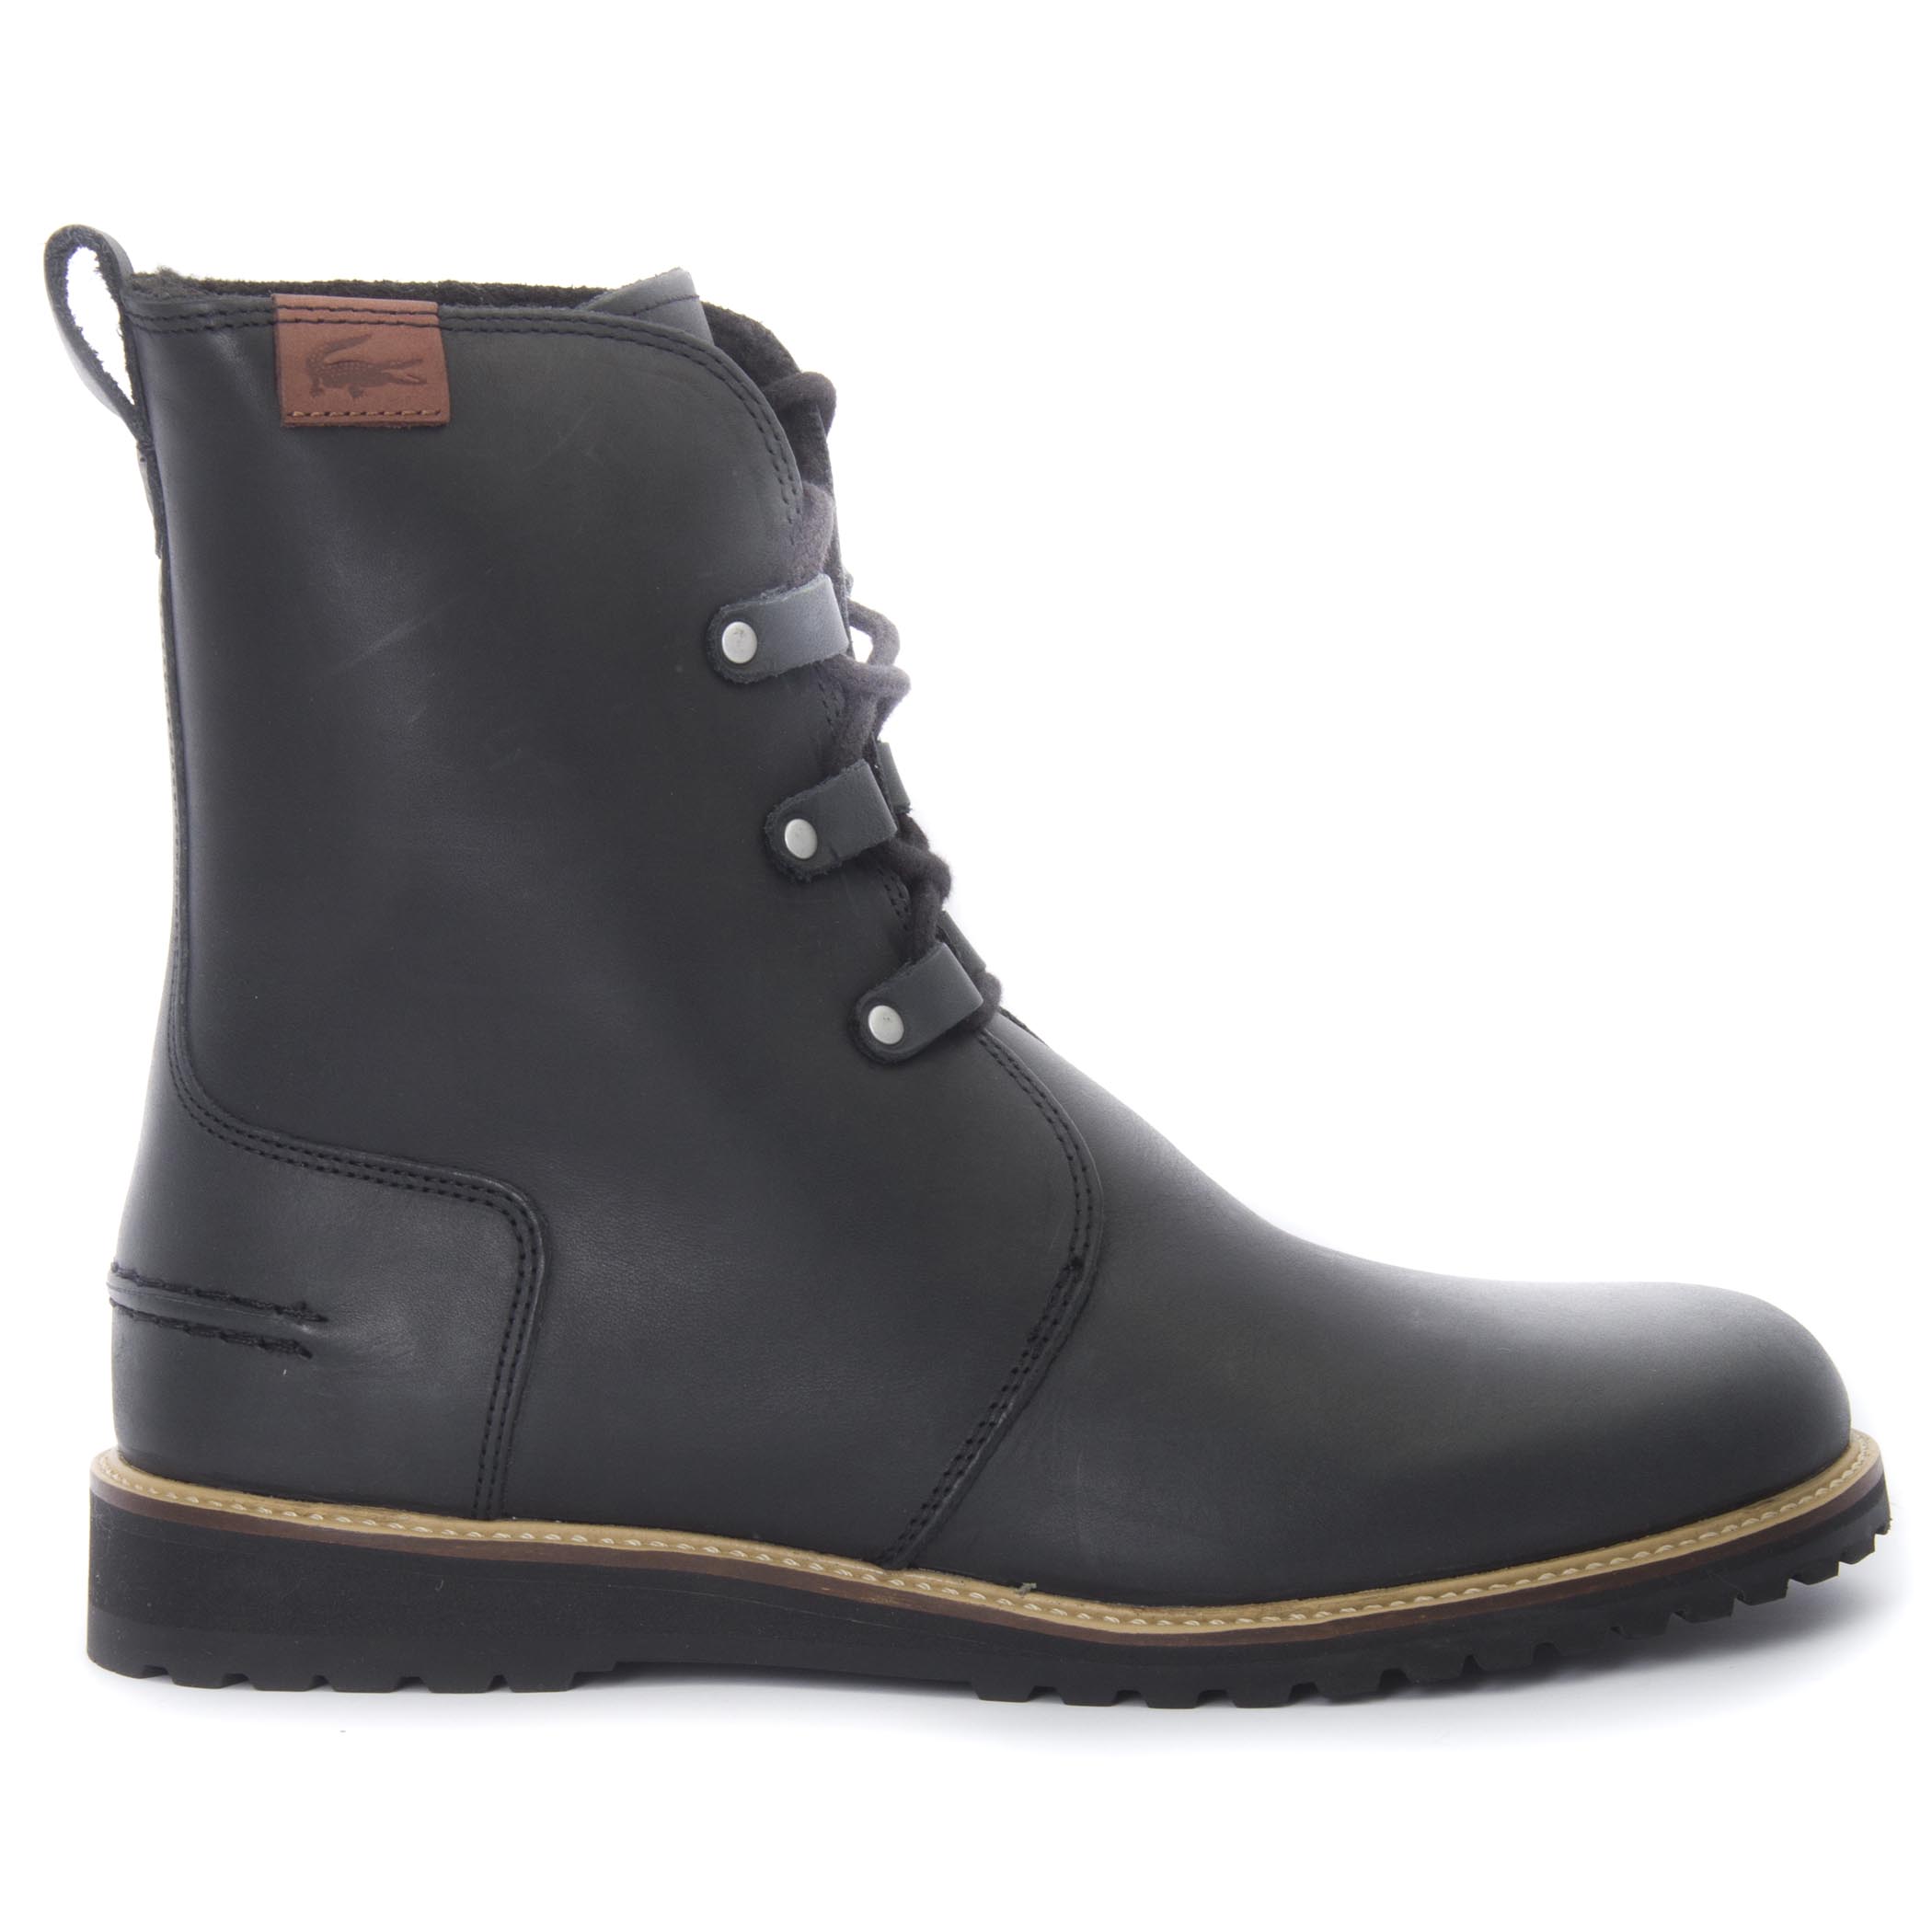 lacoste boots for ladies - 55% OFF 